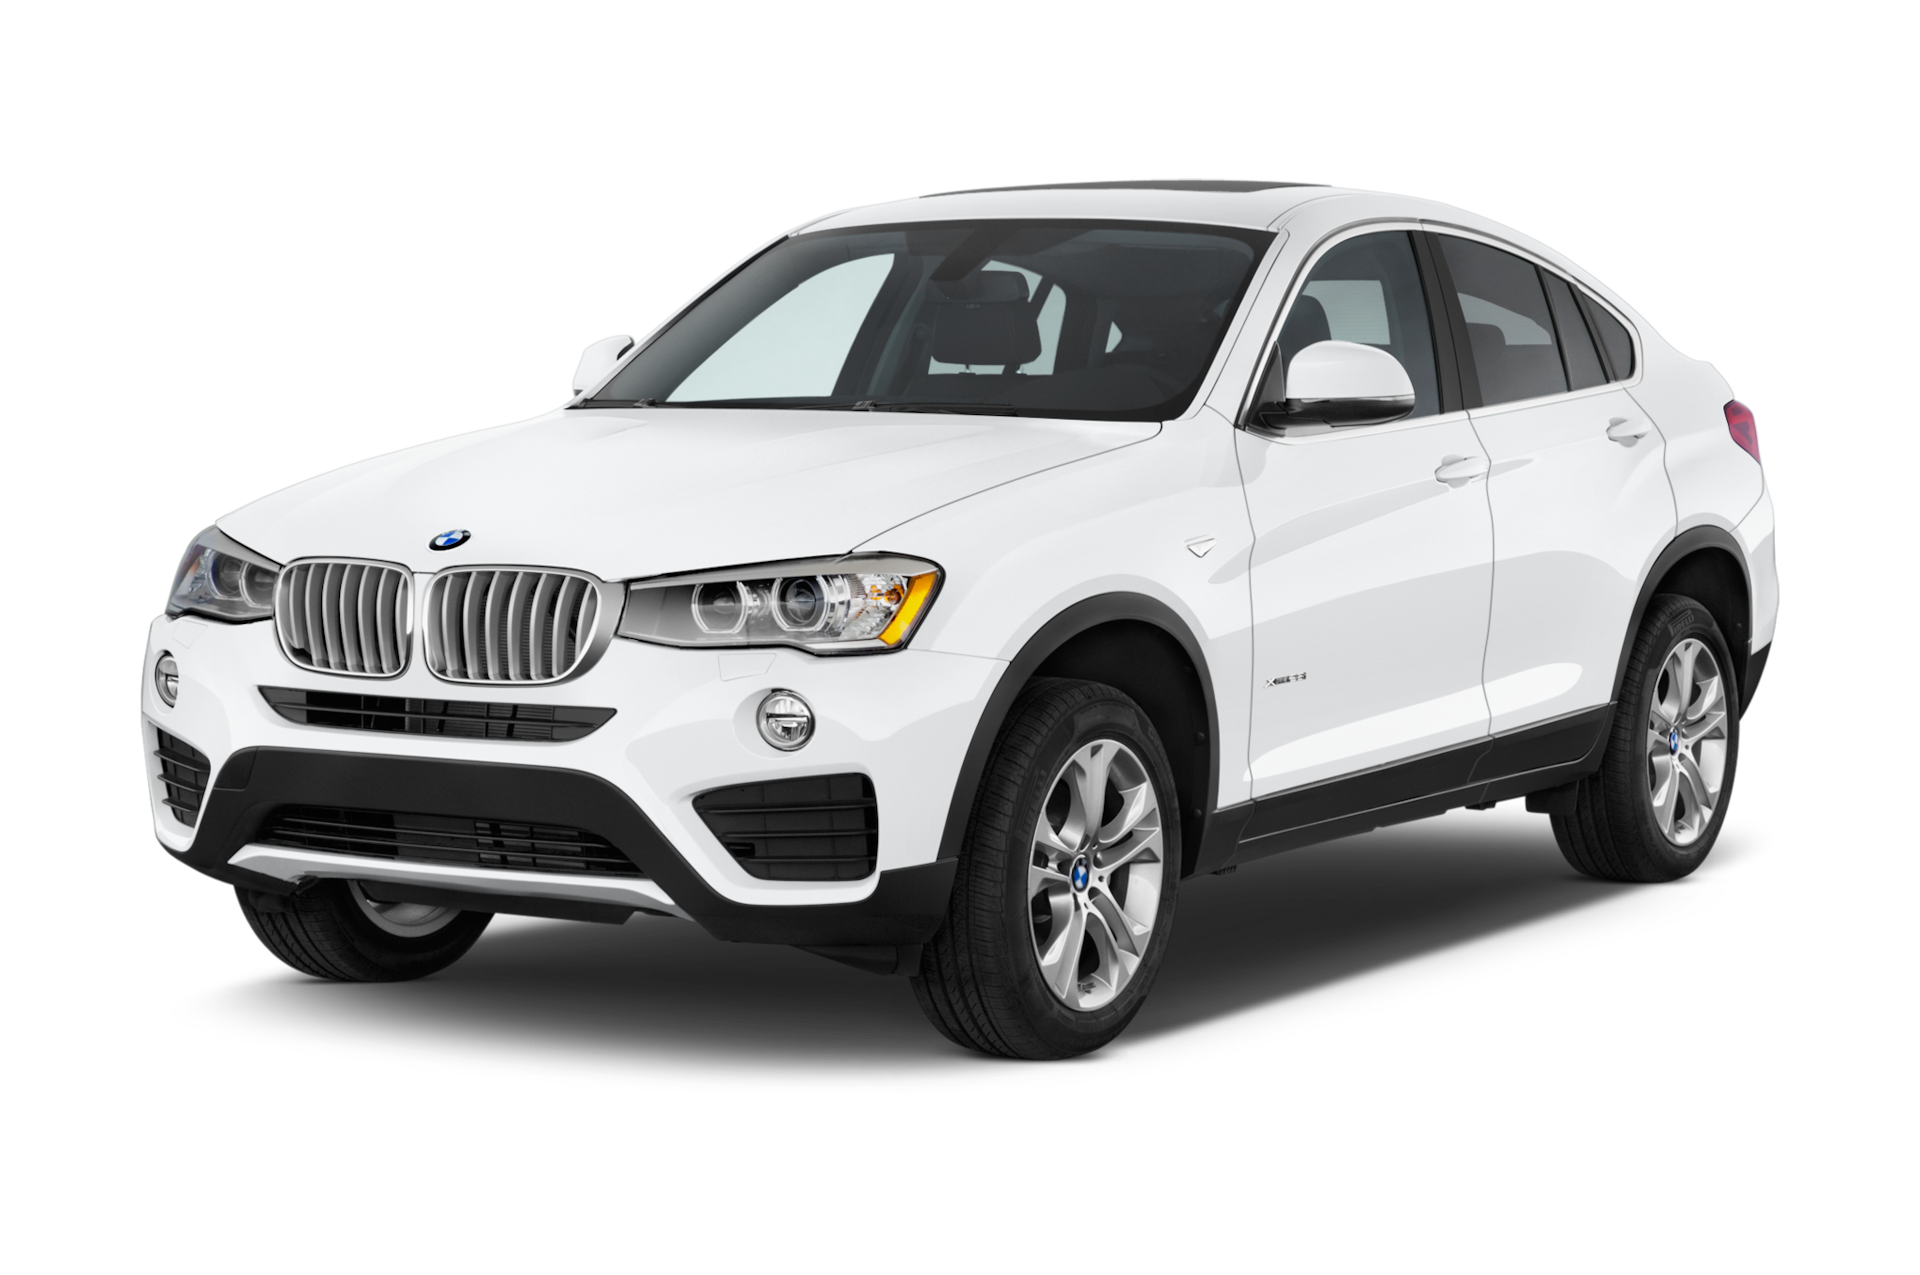 2018 BMW X4 Prices, Reviews, and Photos - MotorTrend